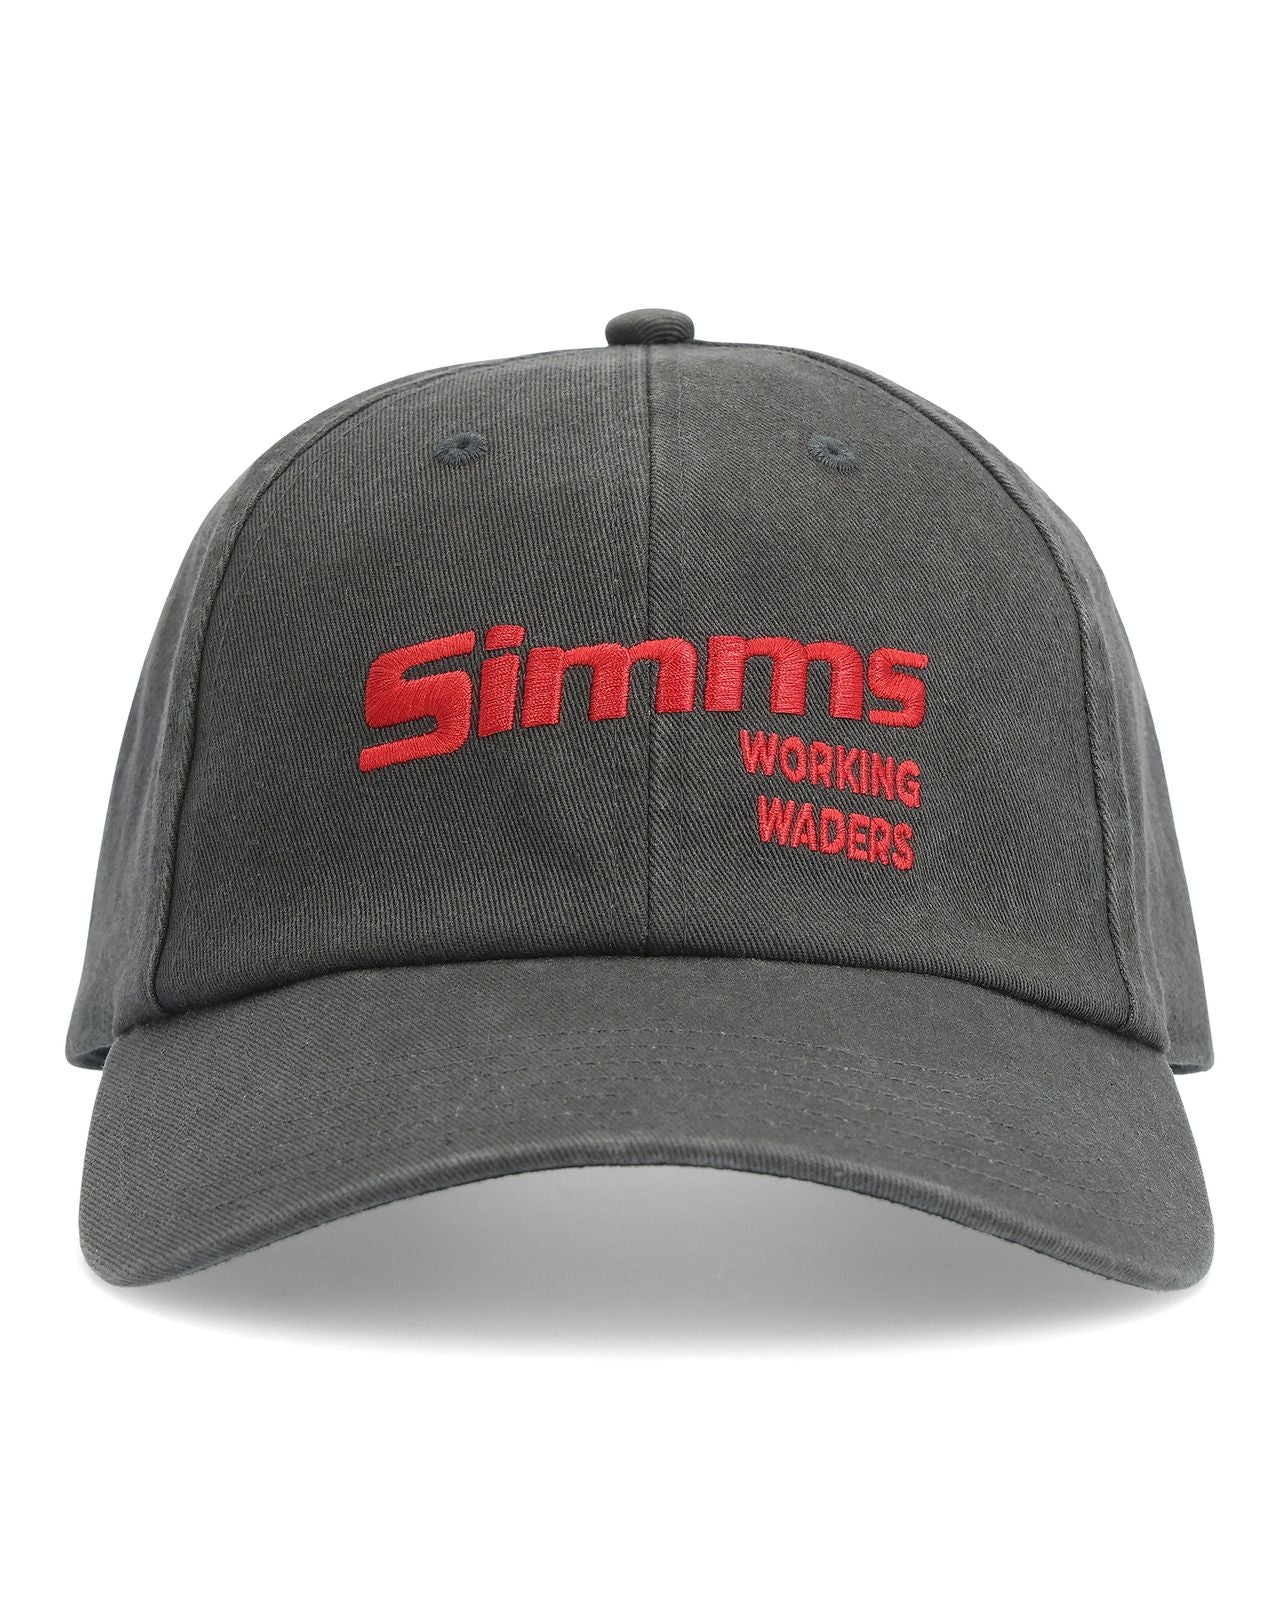 Simms® Visor, Hats & Caps - Fly and Flies